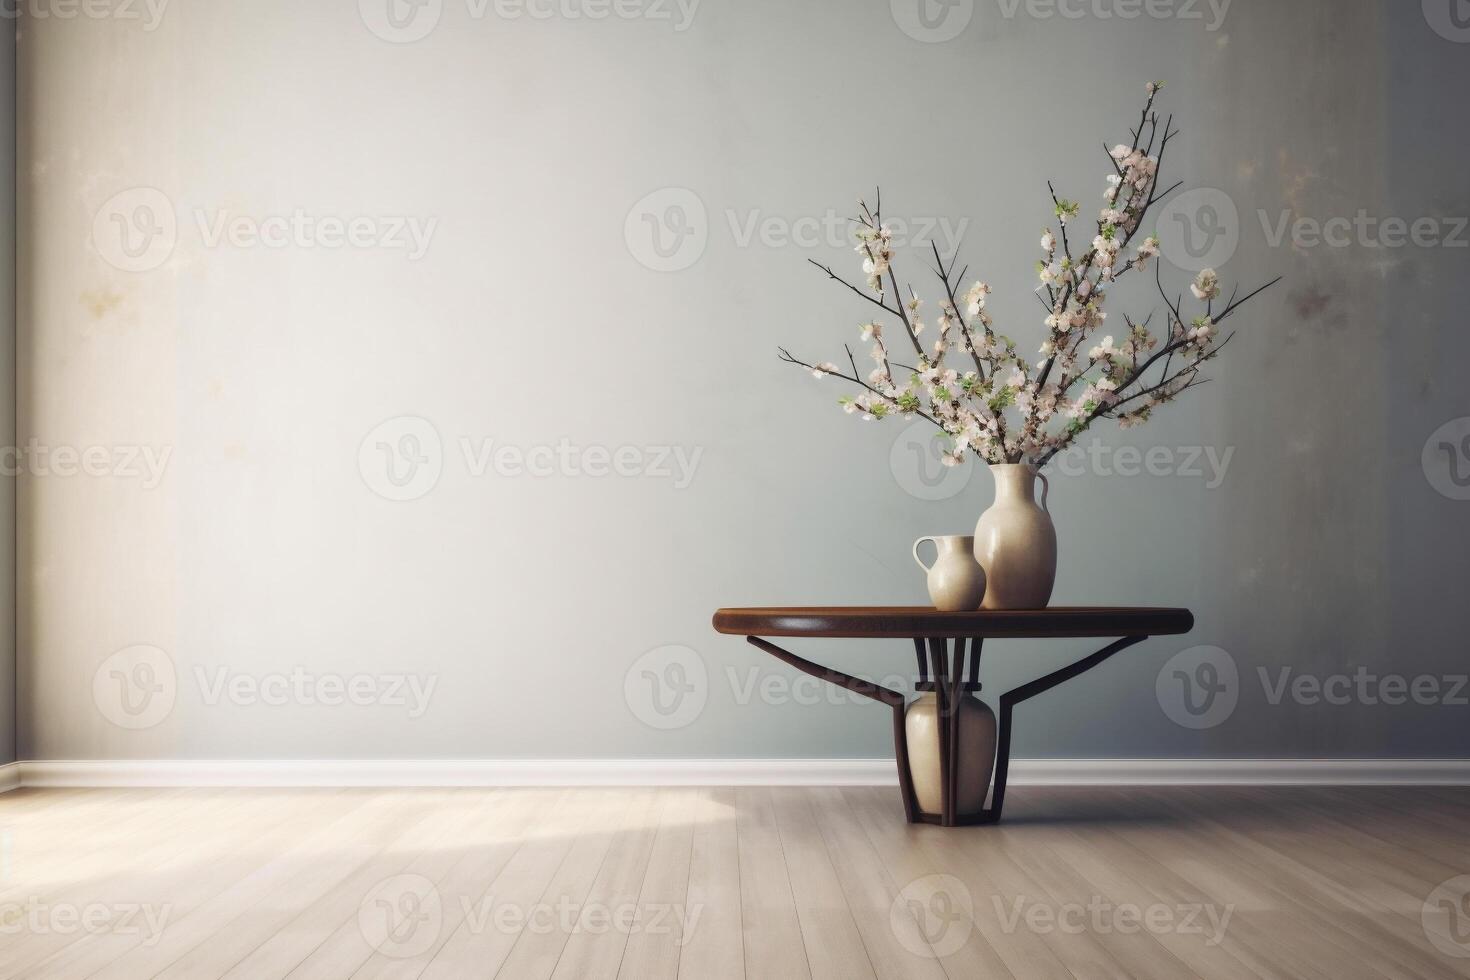 indoor view with pot, leaves and furniture in asian style photo